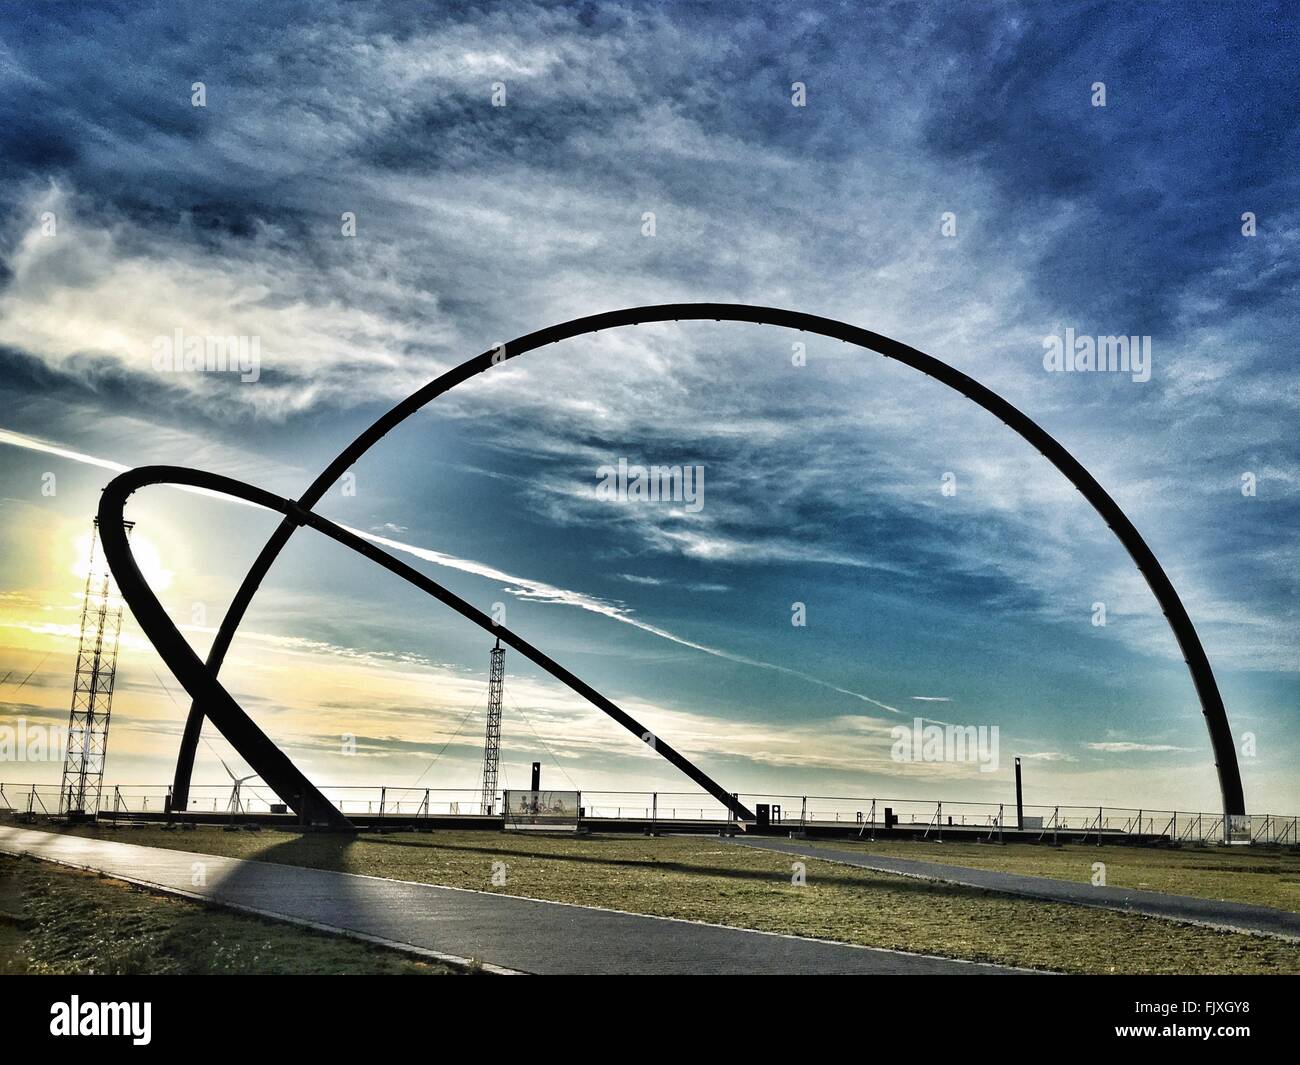 Metallic Arch Structure At Halde Hoheward Against Sky Stock Photo